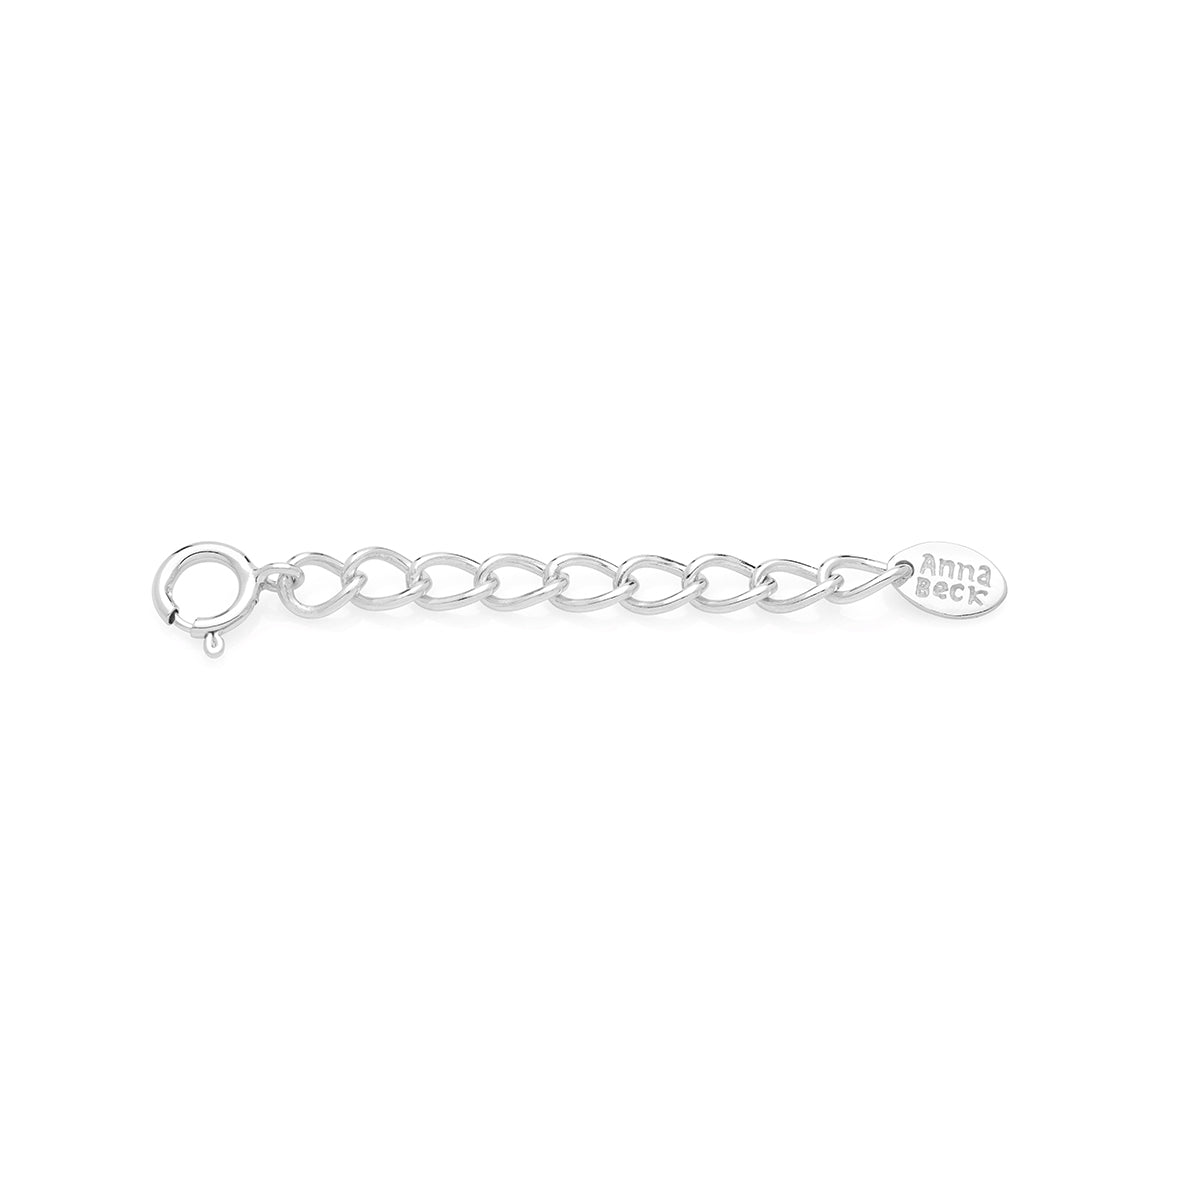 5 Stainless Steel Extender Silver Tone Link 2 Chains F420 